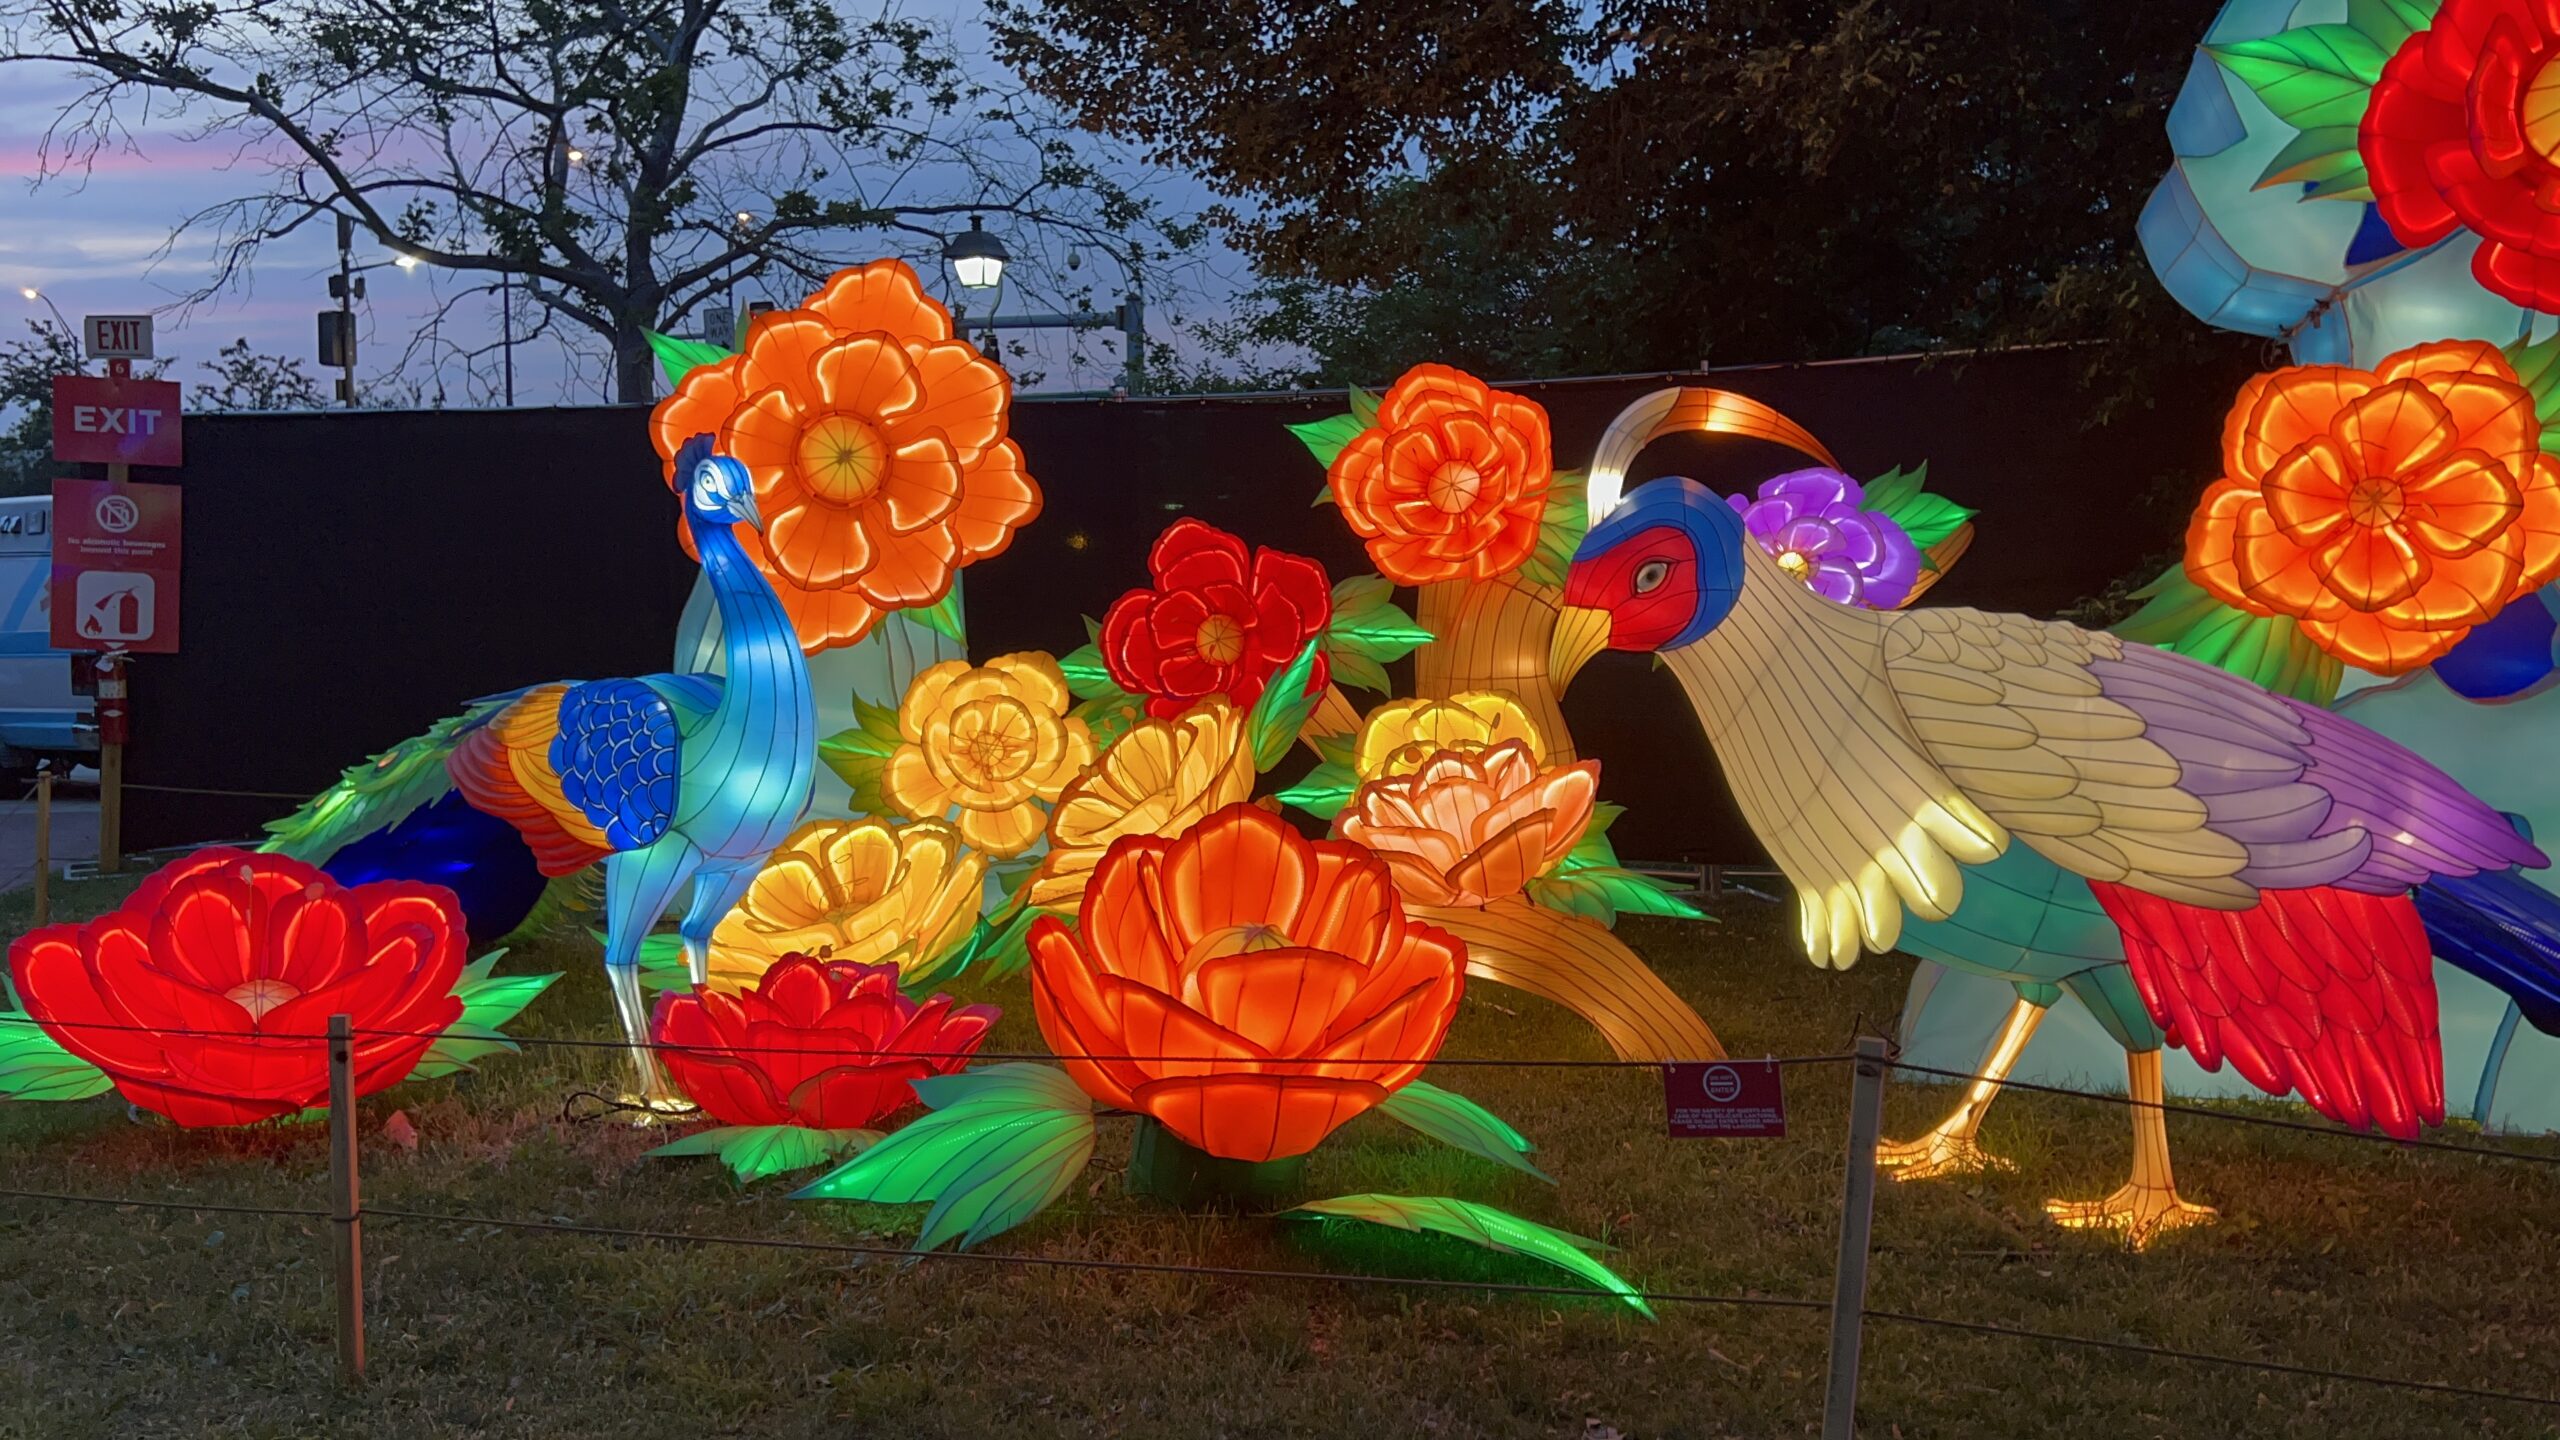 Birds and Flowers at Philadelphia Chinese Lantern Festival lit up at night close up of birds WIDE